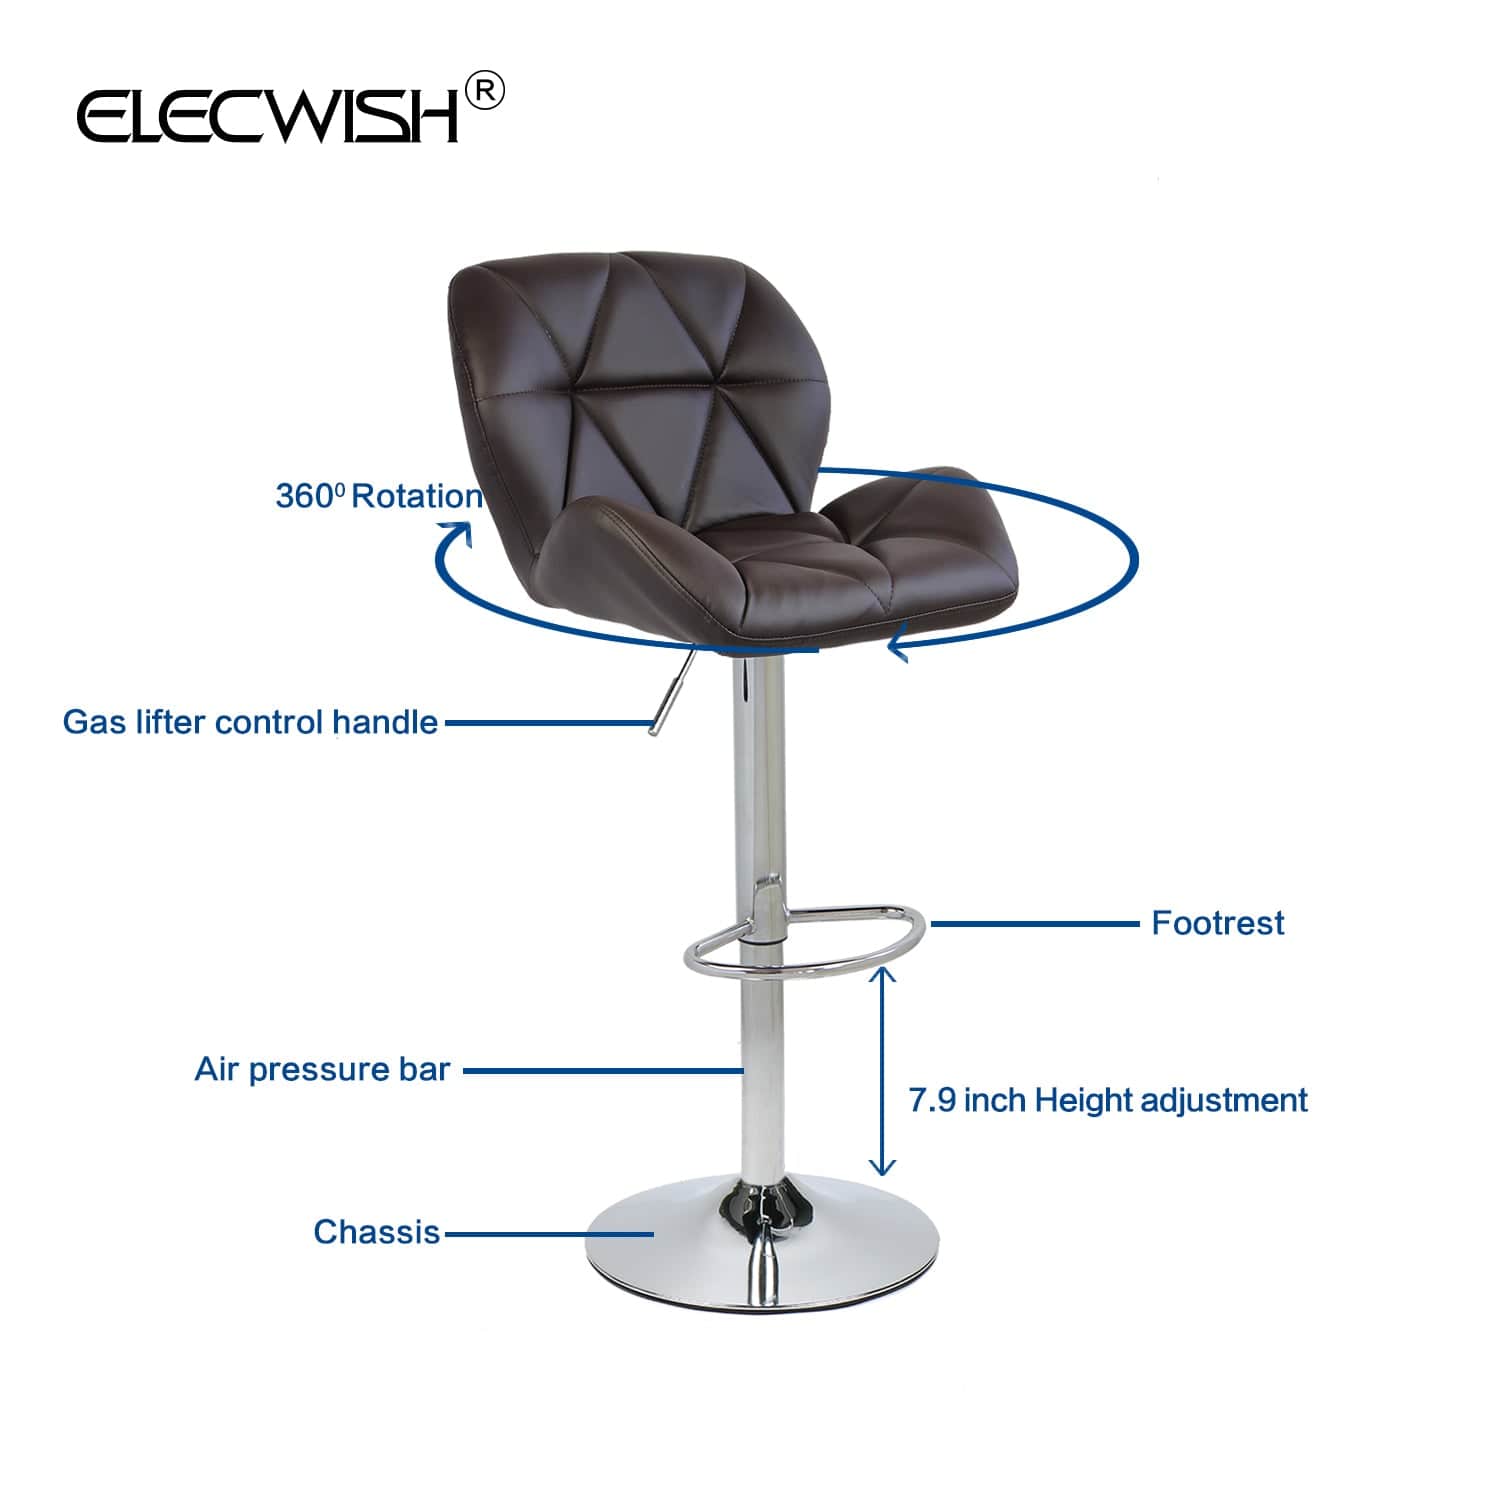 Elecwish Barstools Grid Brown Set of 2 Bar Stools OW001 features